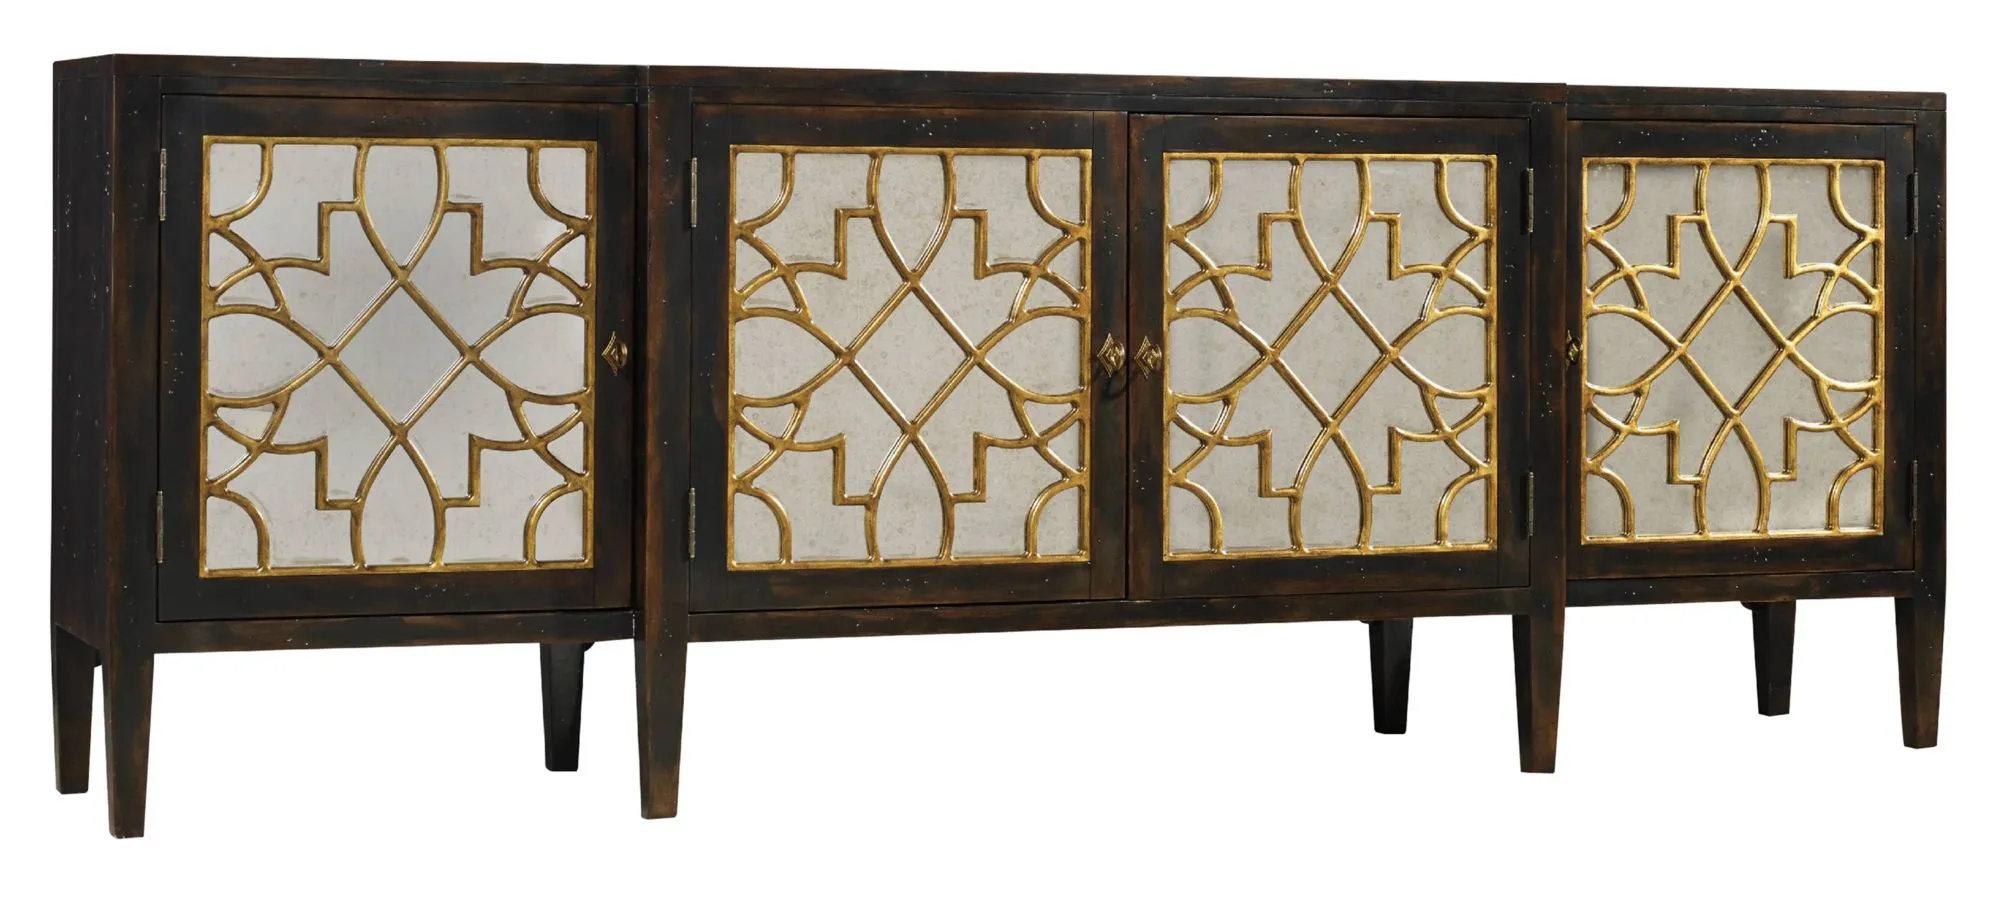 Sanctuary Rectangular Mirrored Console in Ebony by Hooker Furniture